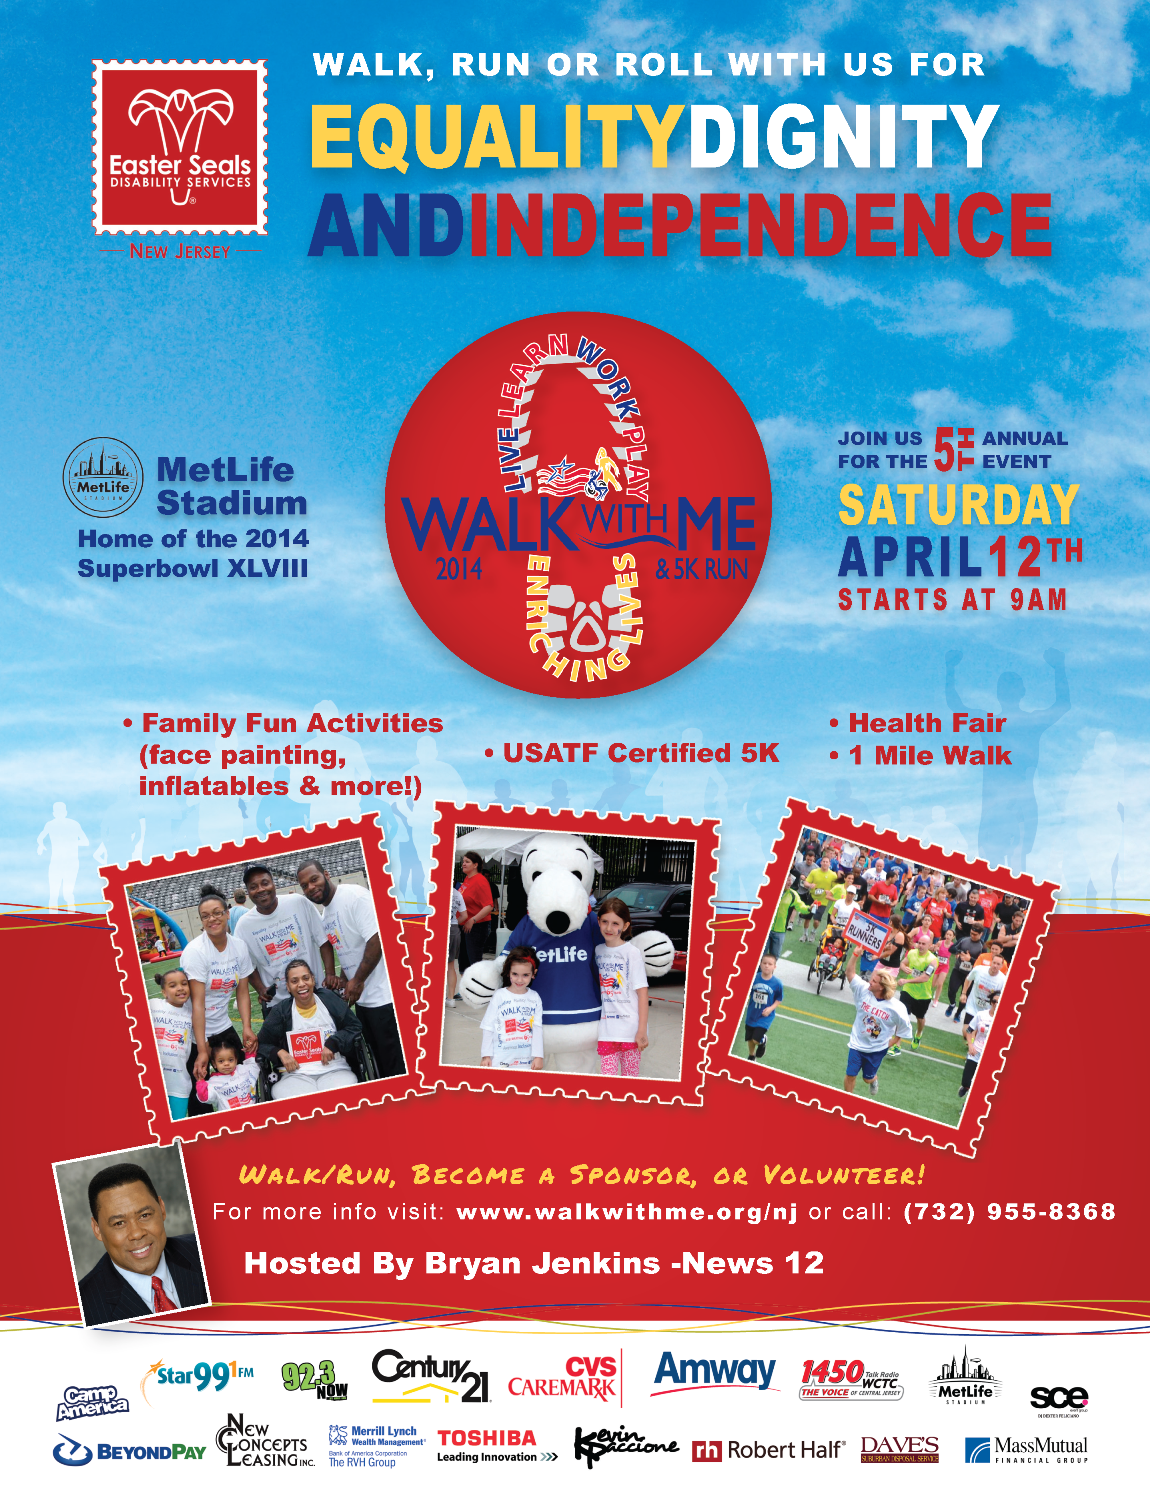 2014 Walk With Me & 5k Run Event Flyer